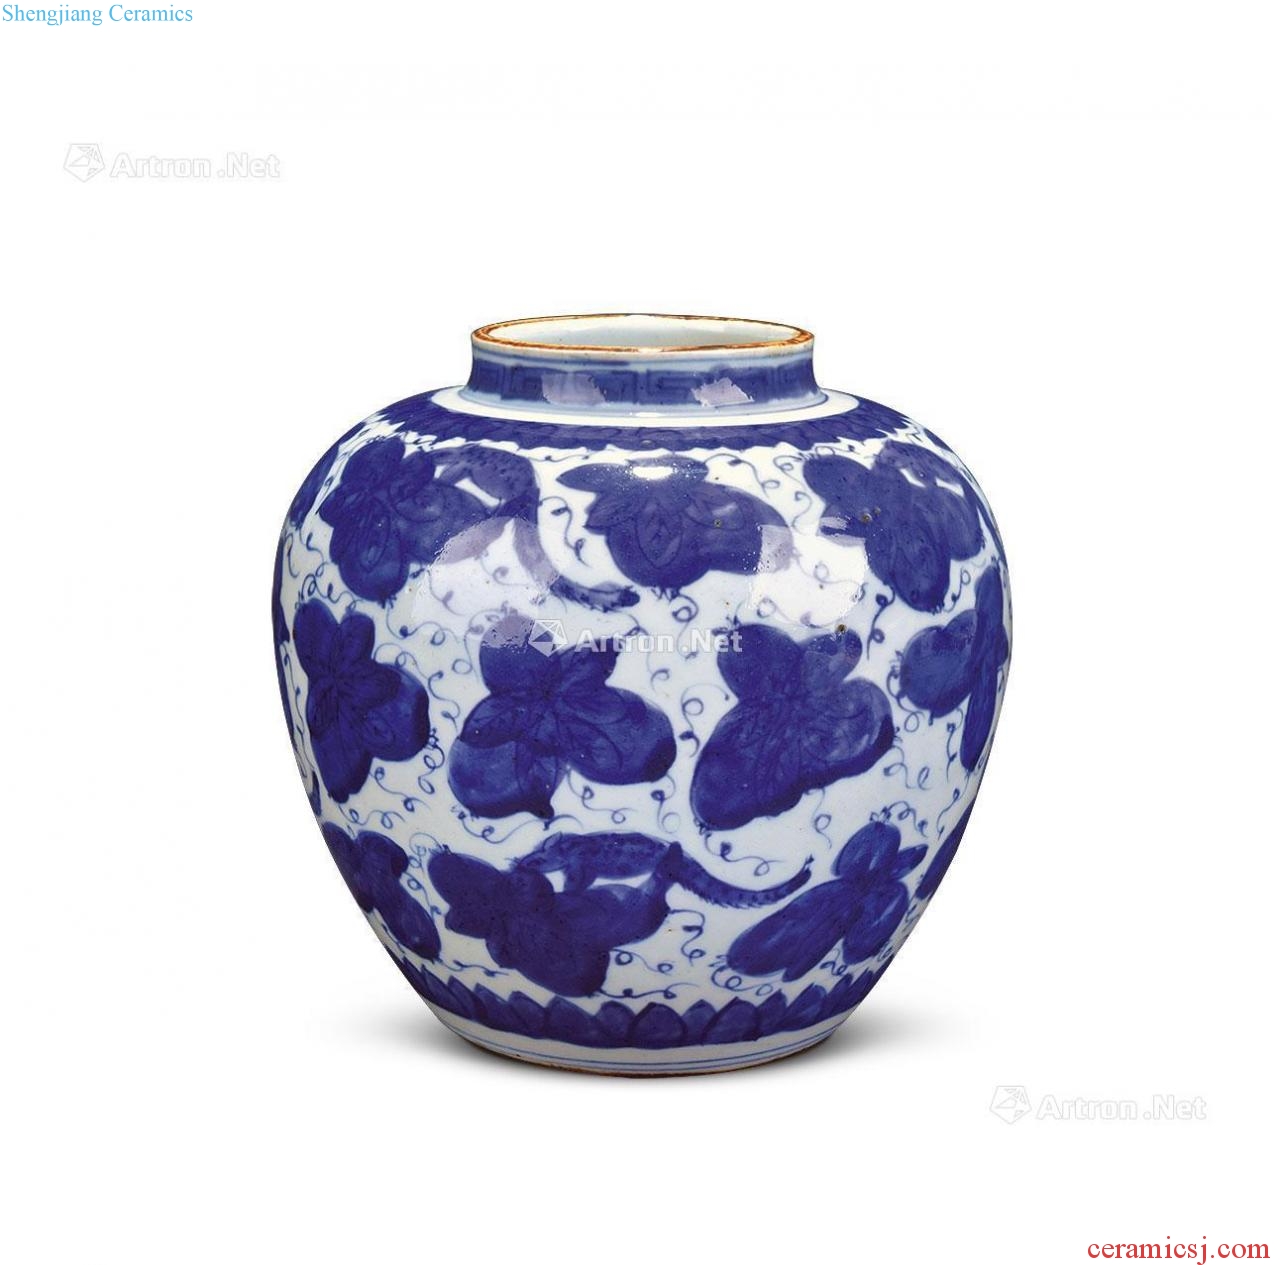 In the qing dynasty porcelain pot